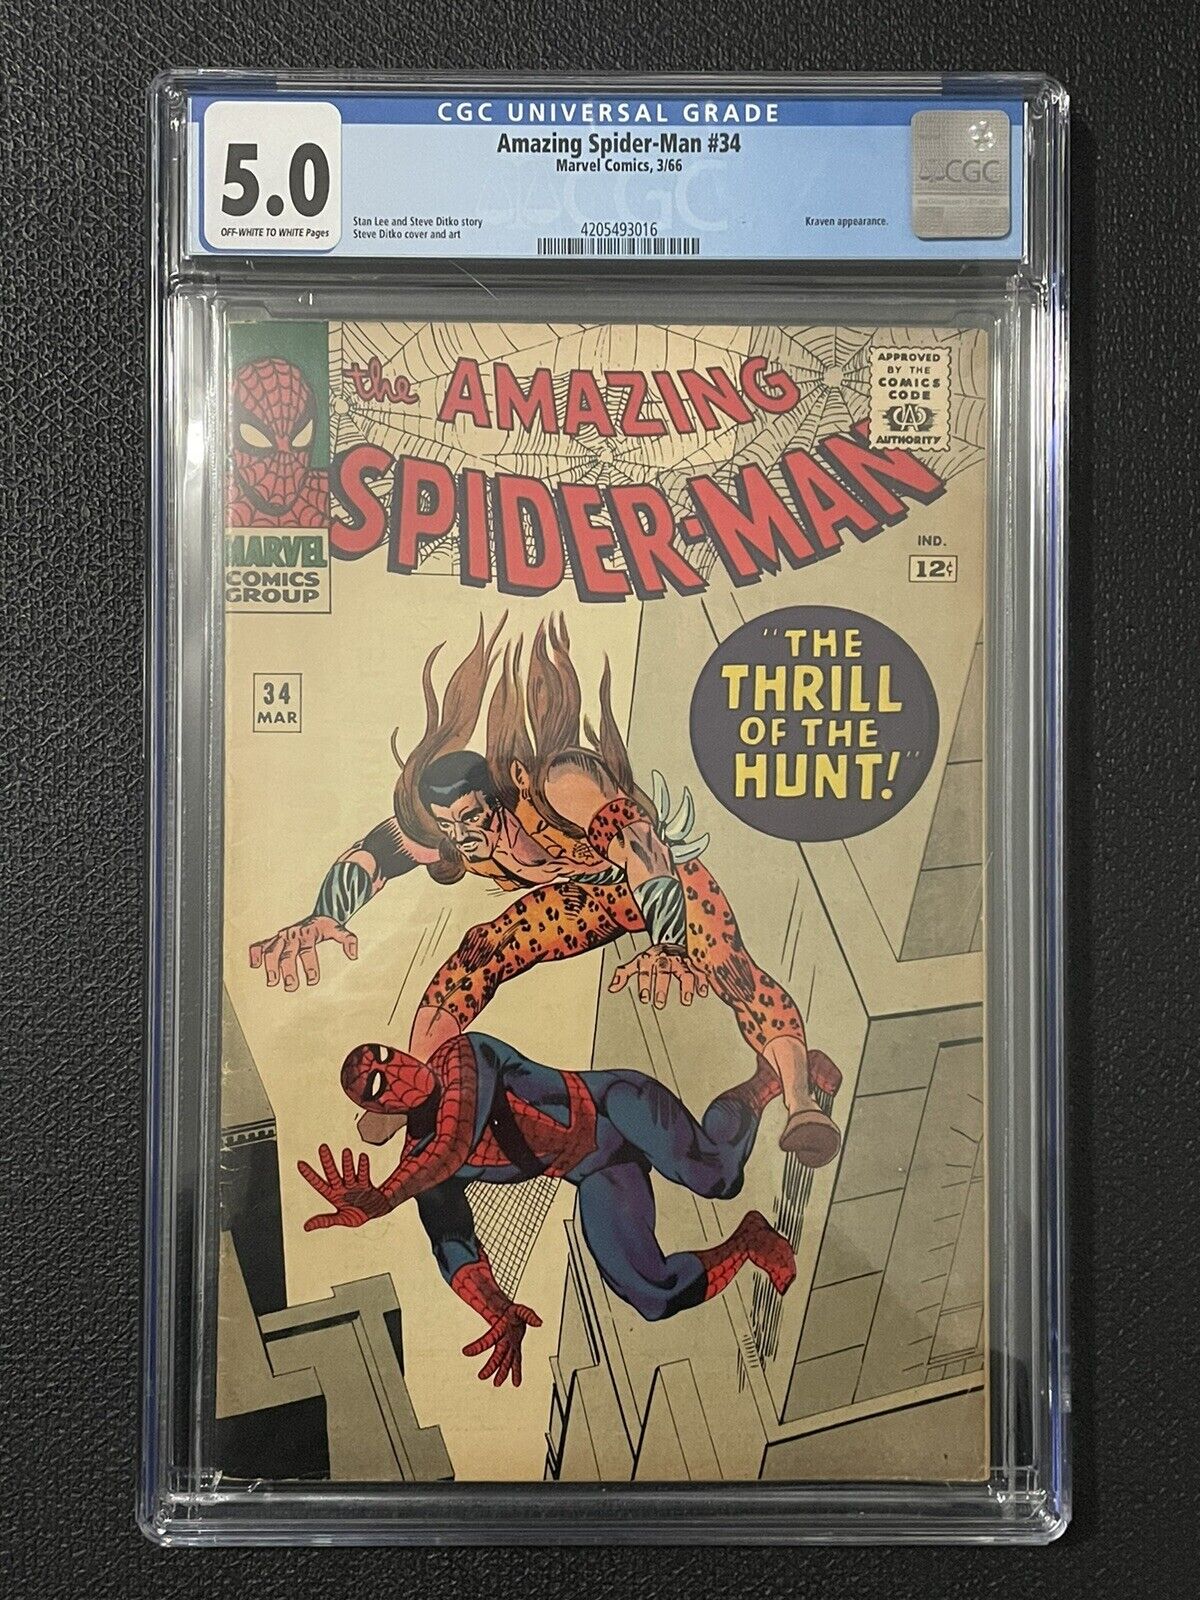 AMAZING SPIDER-MAN #34 CGC 5.0 KRAVEN 2nd APPEARANCE GWEN STACY, NED LEEDS 1966